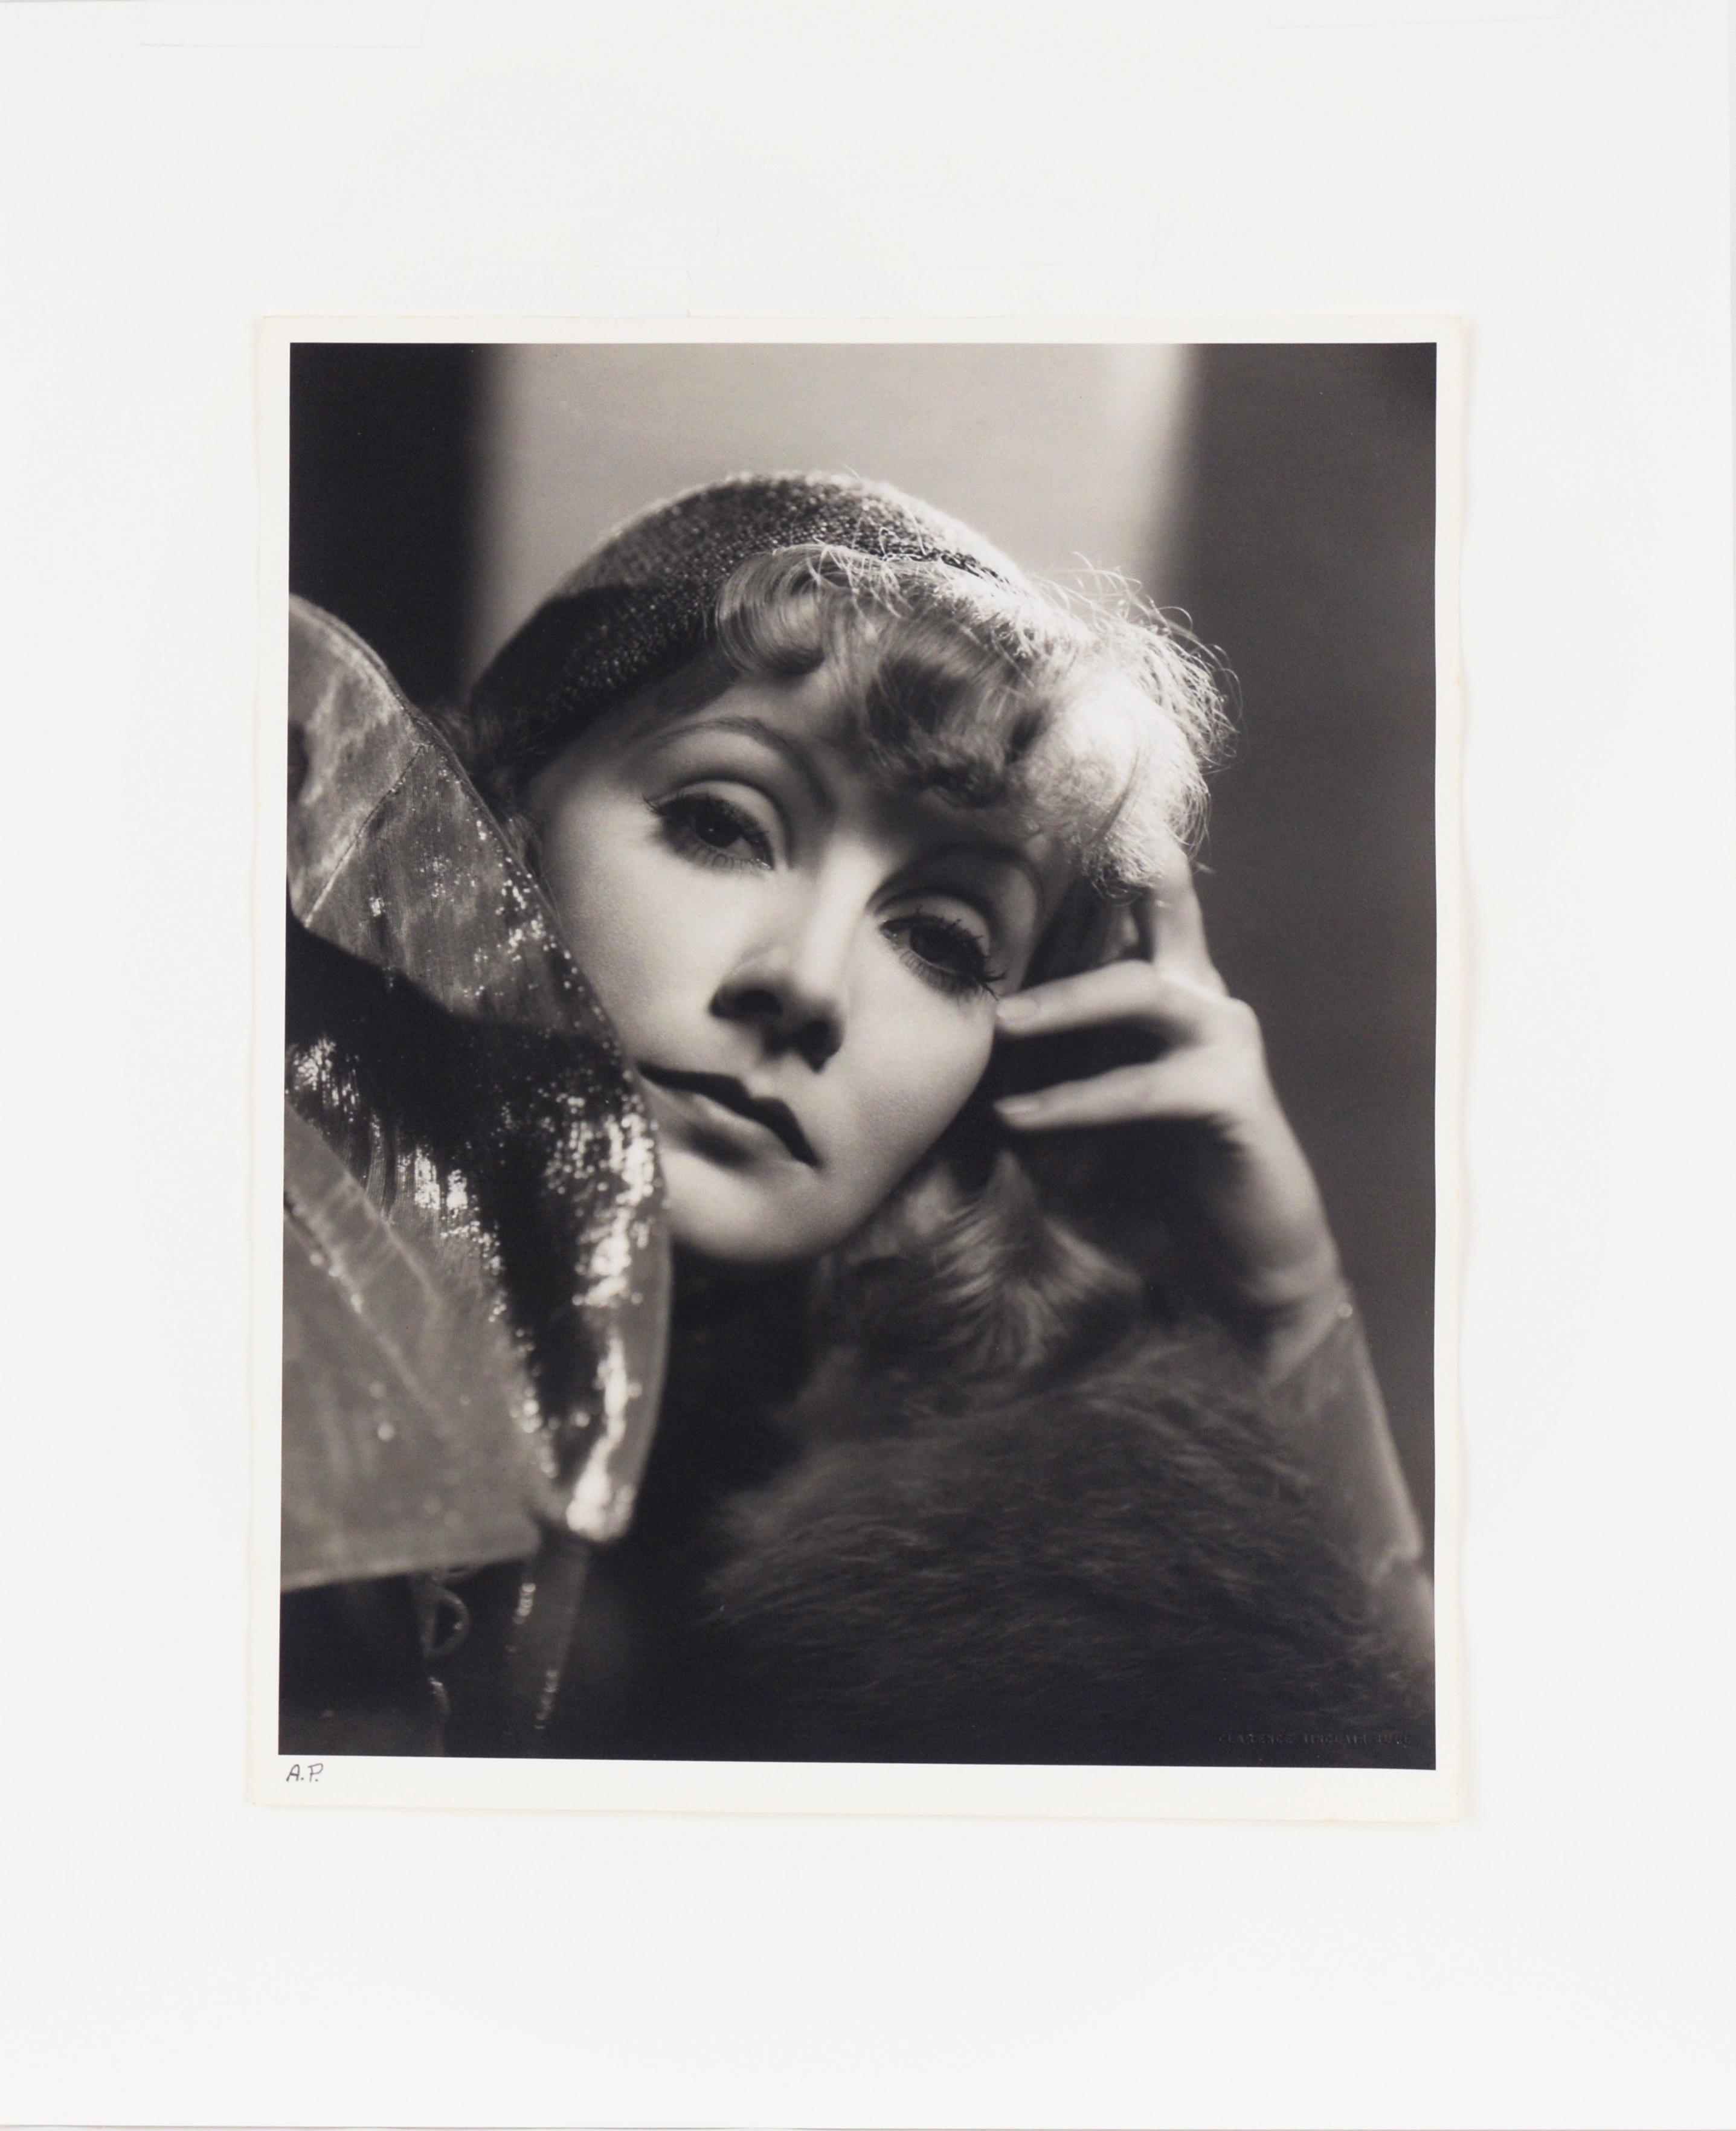 Greta Garbo in Susan Lenox (Her Fall And Rise) - Photograph by Clarence Sinclair Bull

A black and white photograph by Clarence Sinclair Bull (American, 1896-1979), matte finish, double-weight paper, depicting a 1931 shot of Swedish/American actress